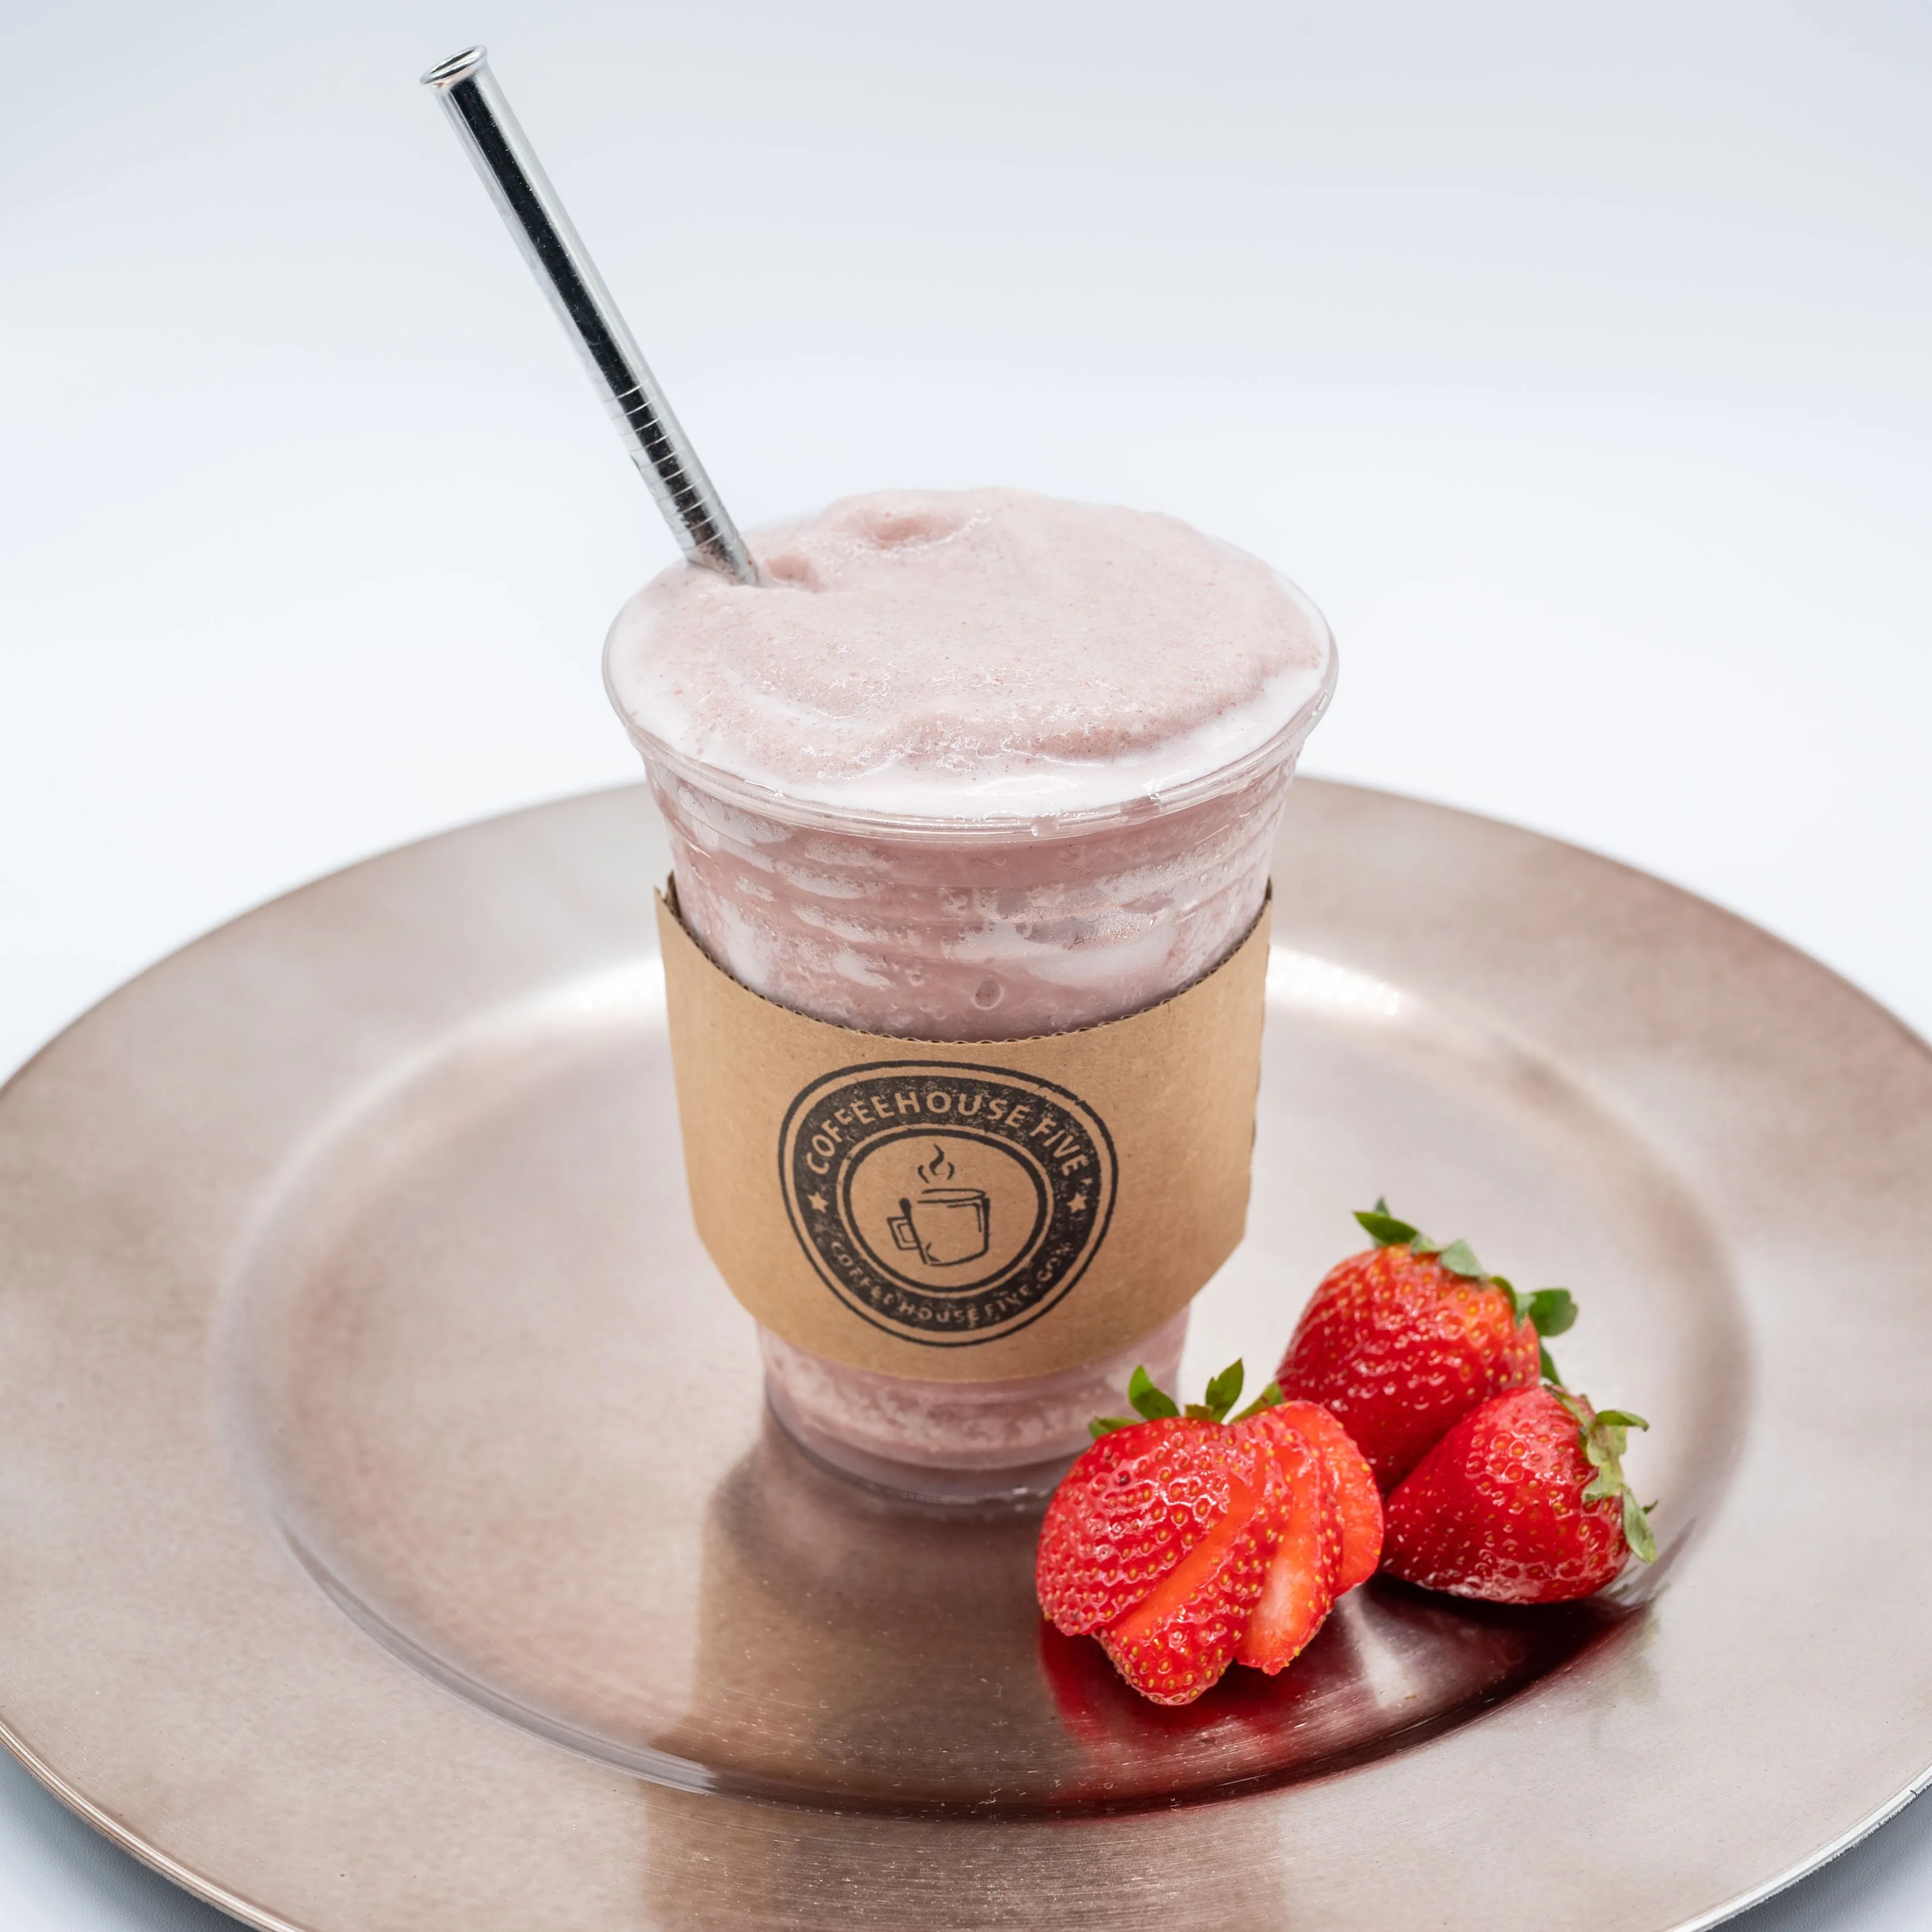 A strawberry smoothie in a clear plastic cup with a metal straw, branded paper sleeve around the cup, on a bronze plate with fresh strawberries beside it, against a white background.